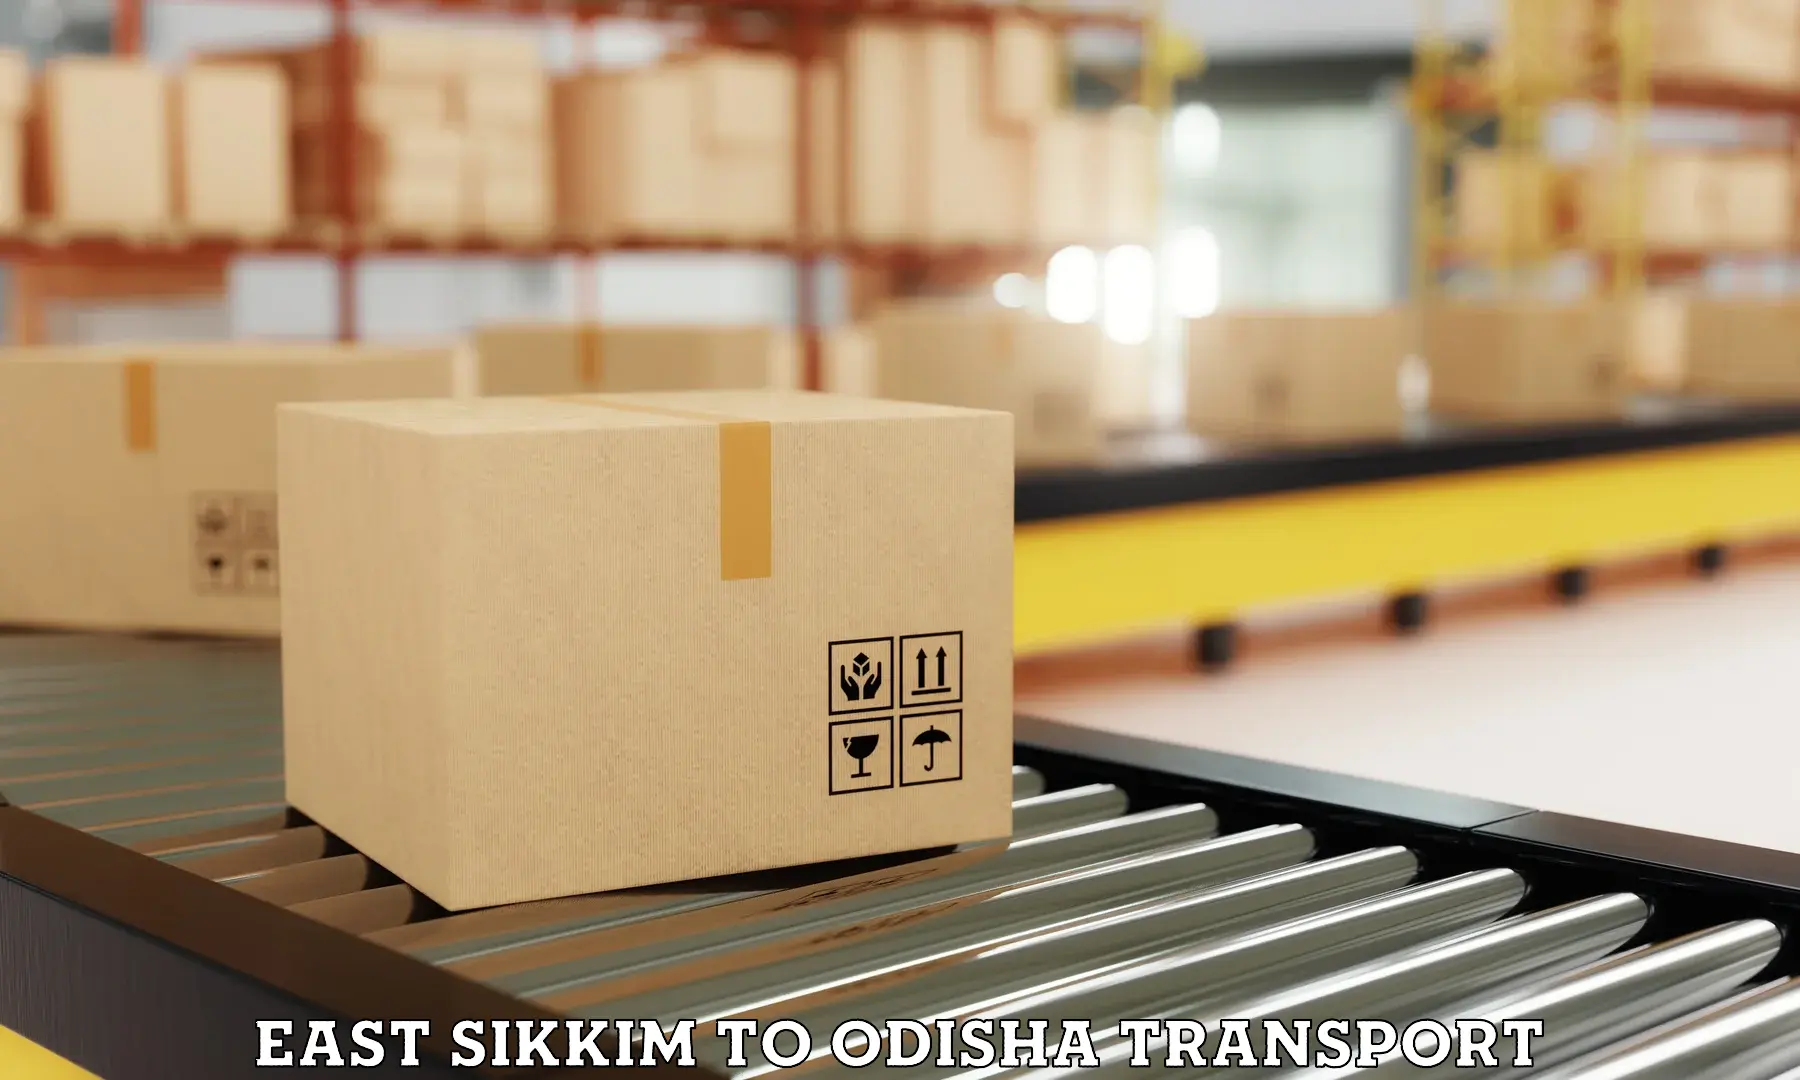 Container transport service East Sikkim to Komana